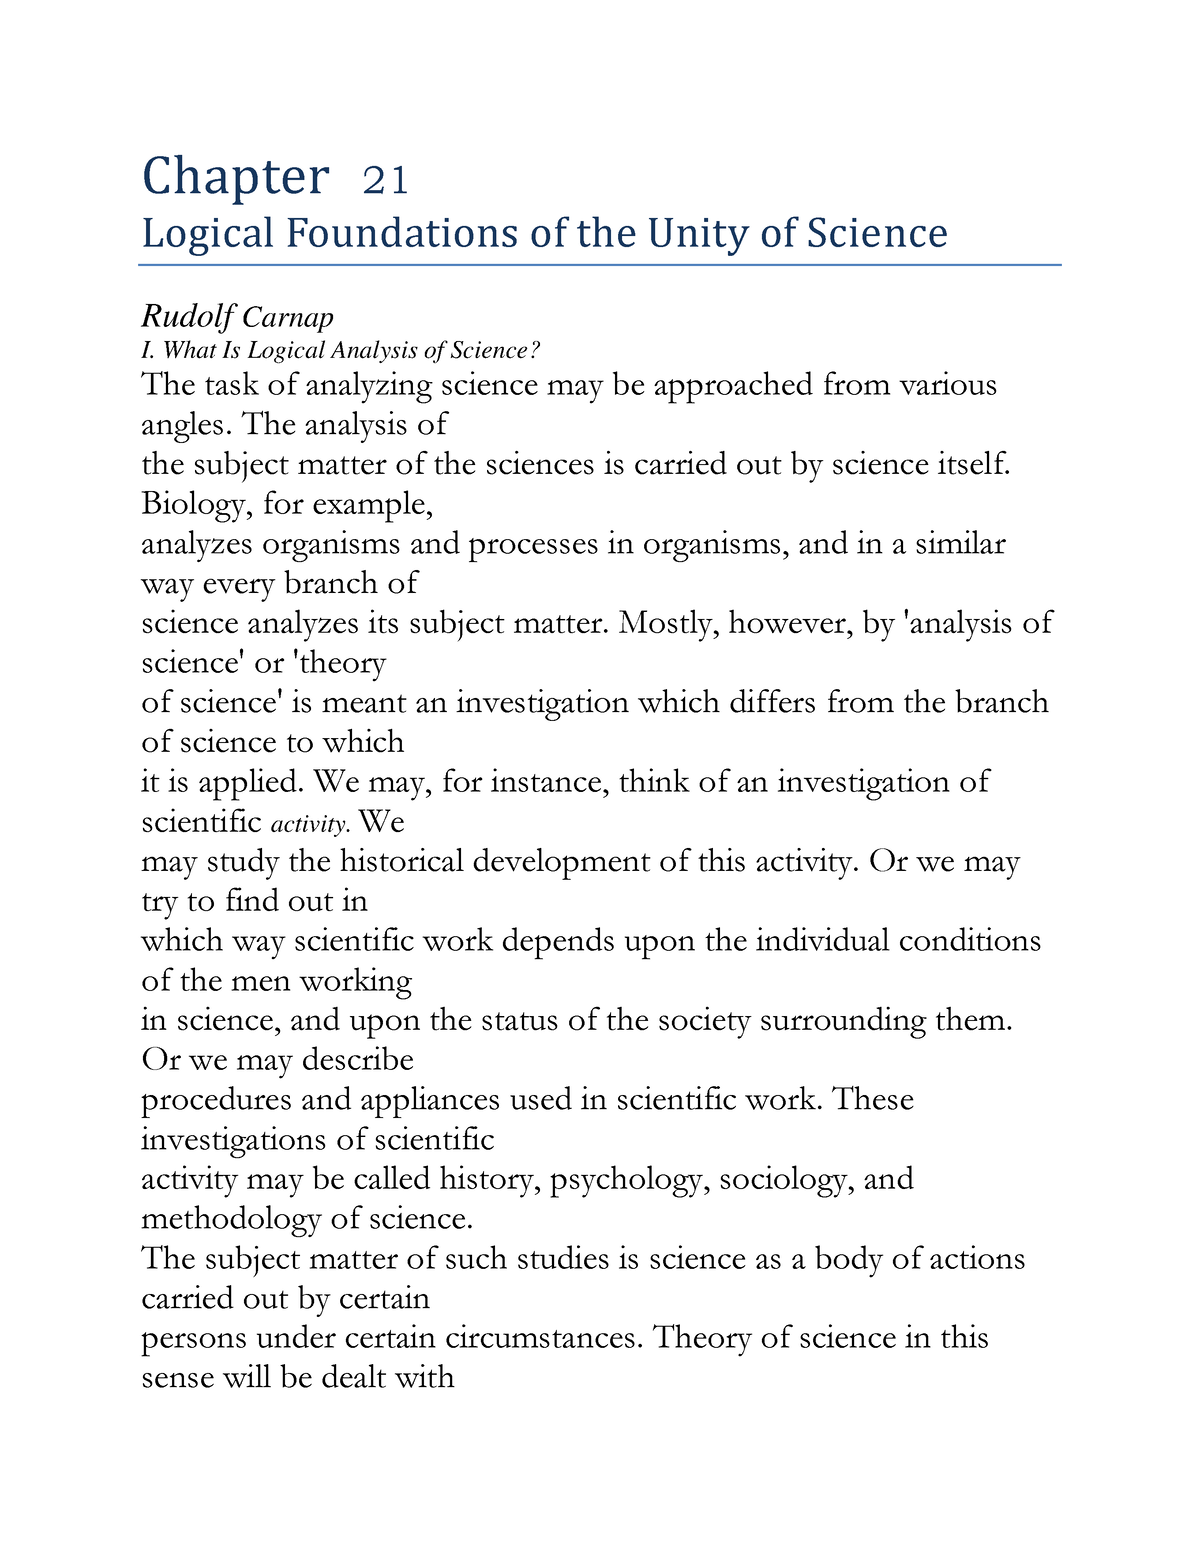 chapter-21-logical-foundations-of-the-unity-of-science-what-is